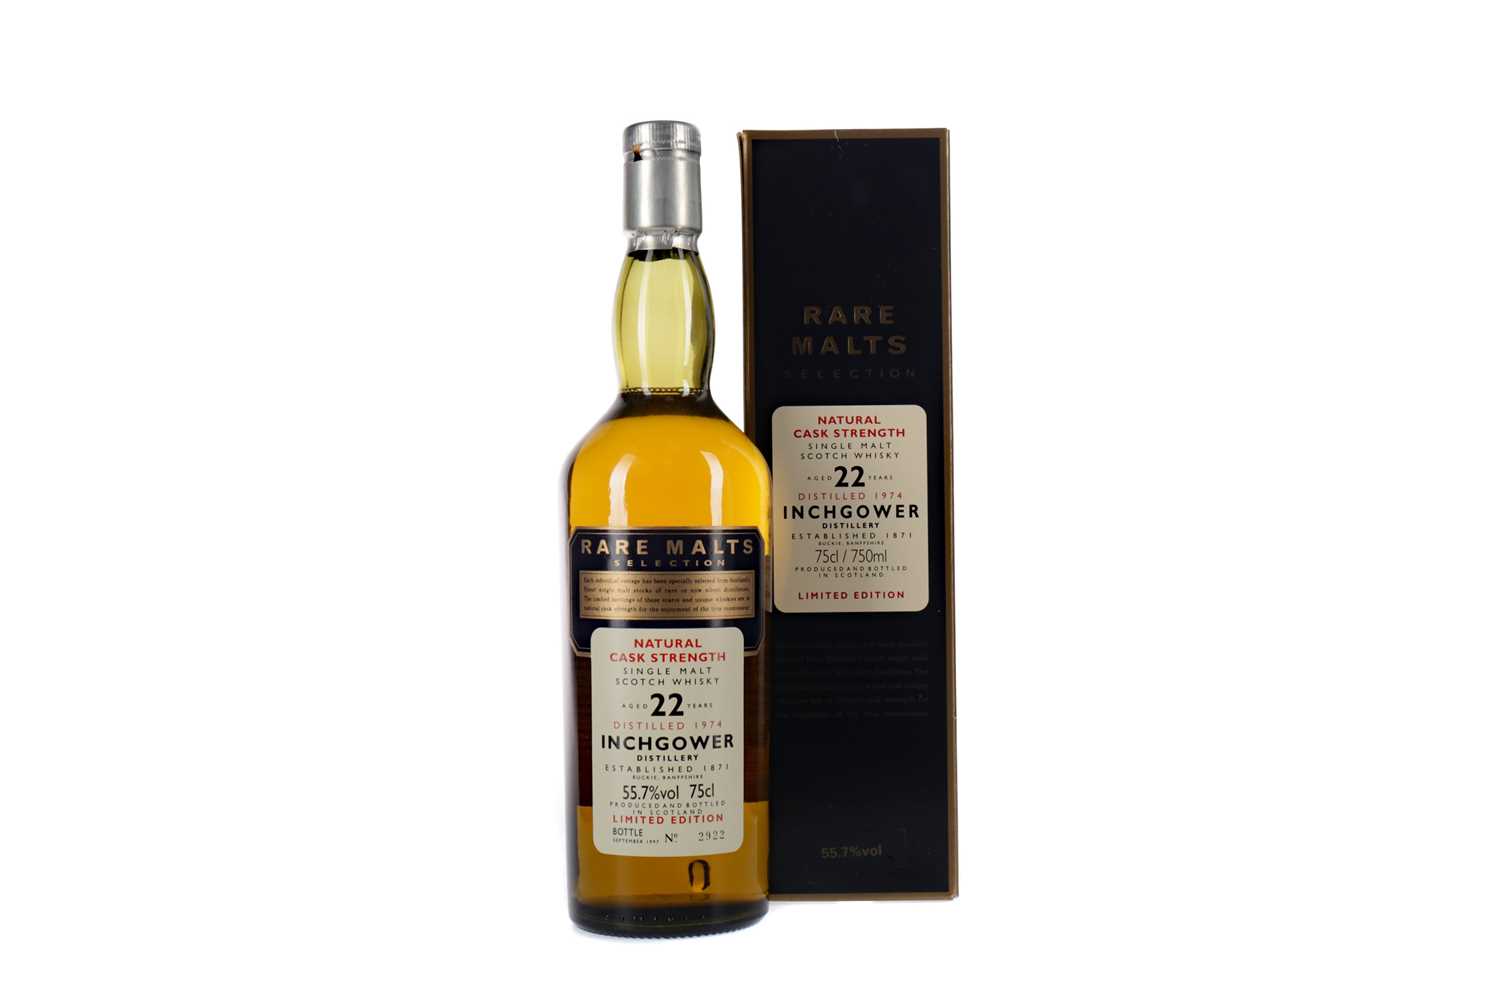 Lot 285 - INCHGOWER 1974 RARE MALTS AGED 22 YEARS